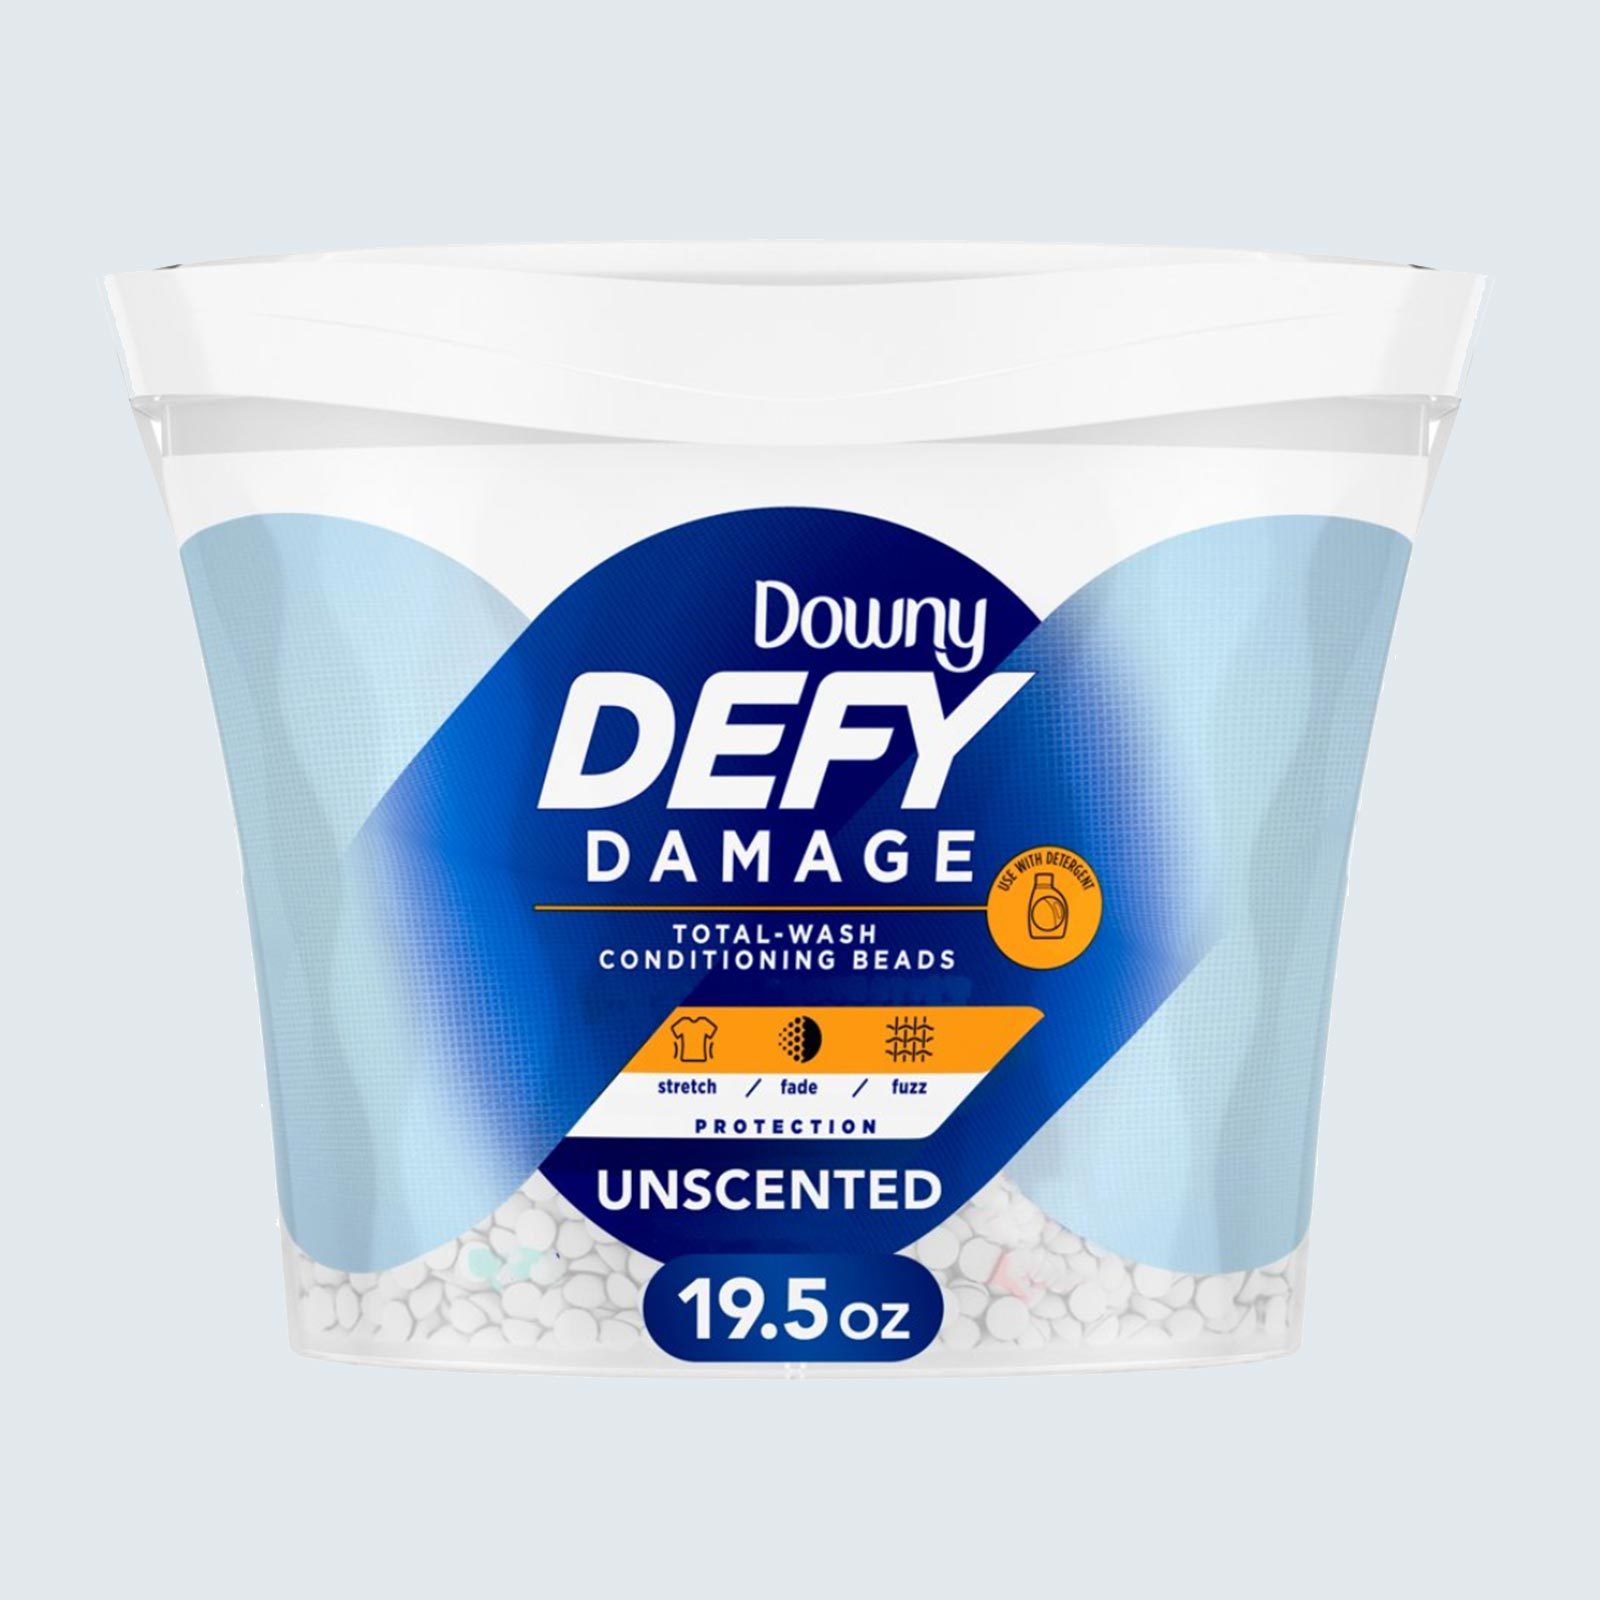 Downy Defy Damage Total-Wash Conditioning Beads